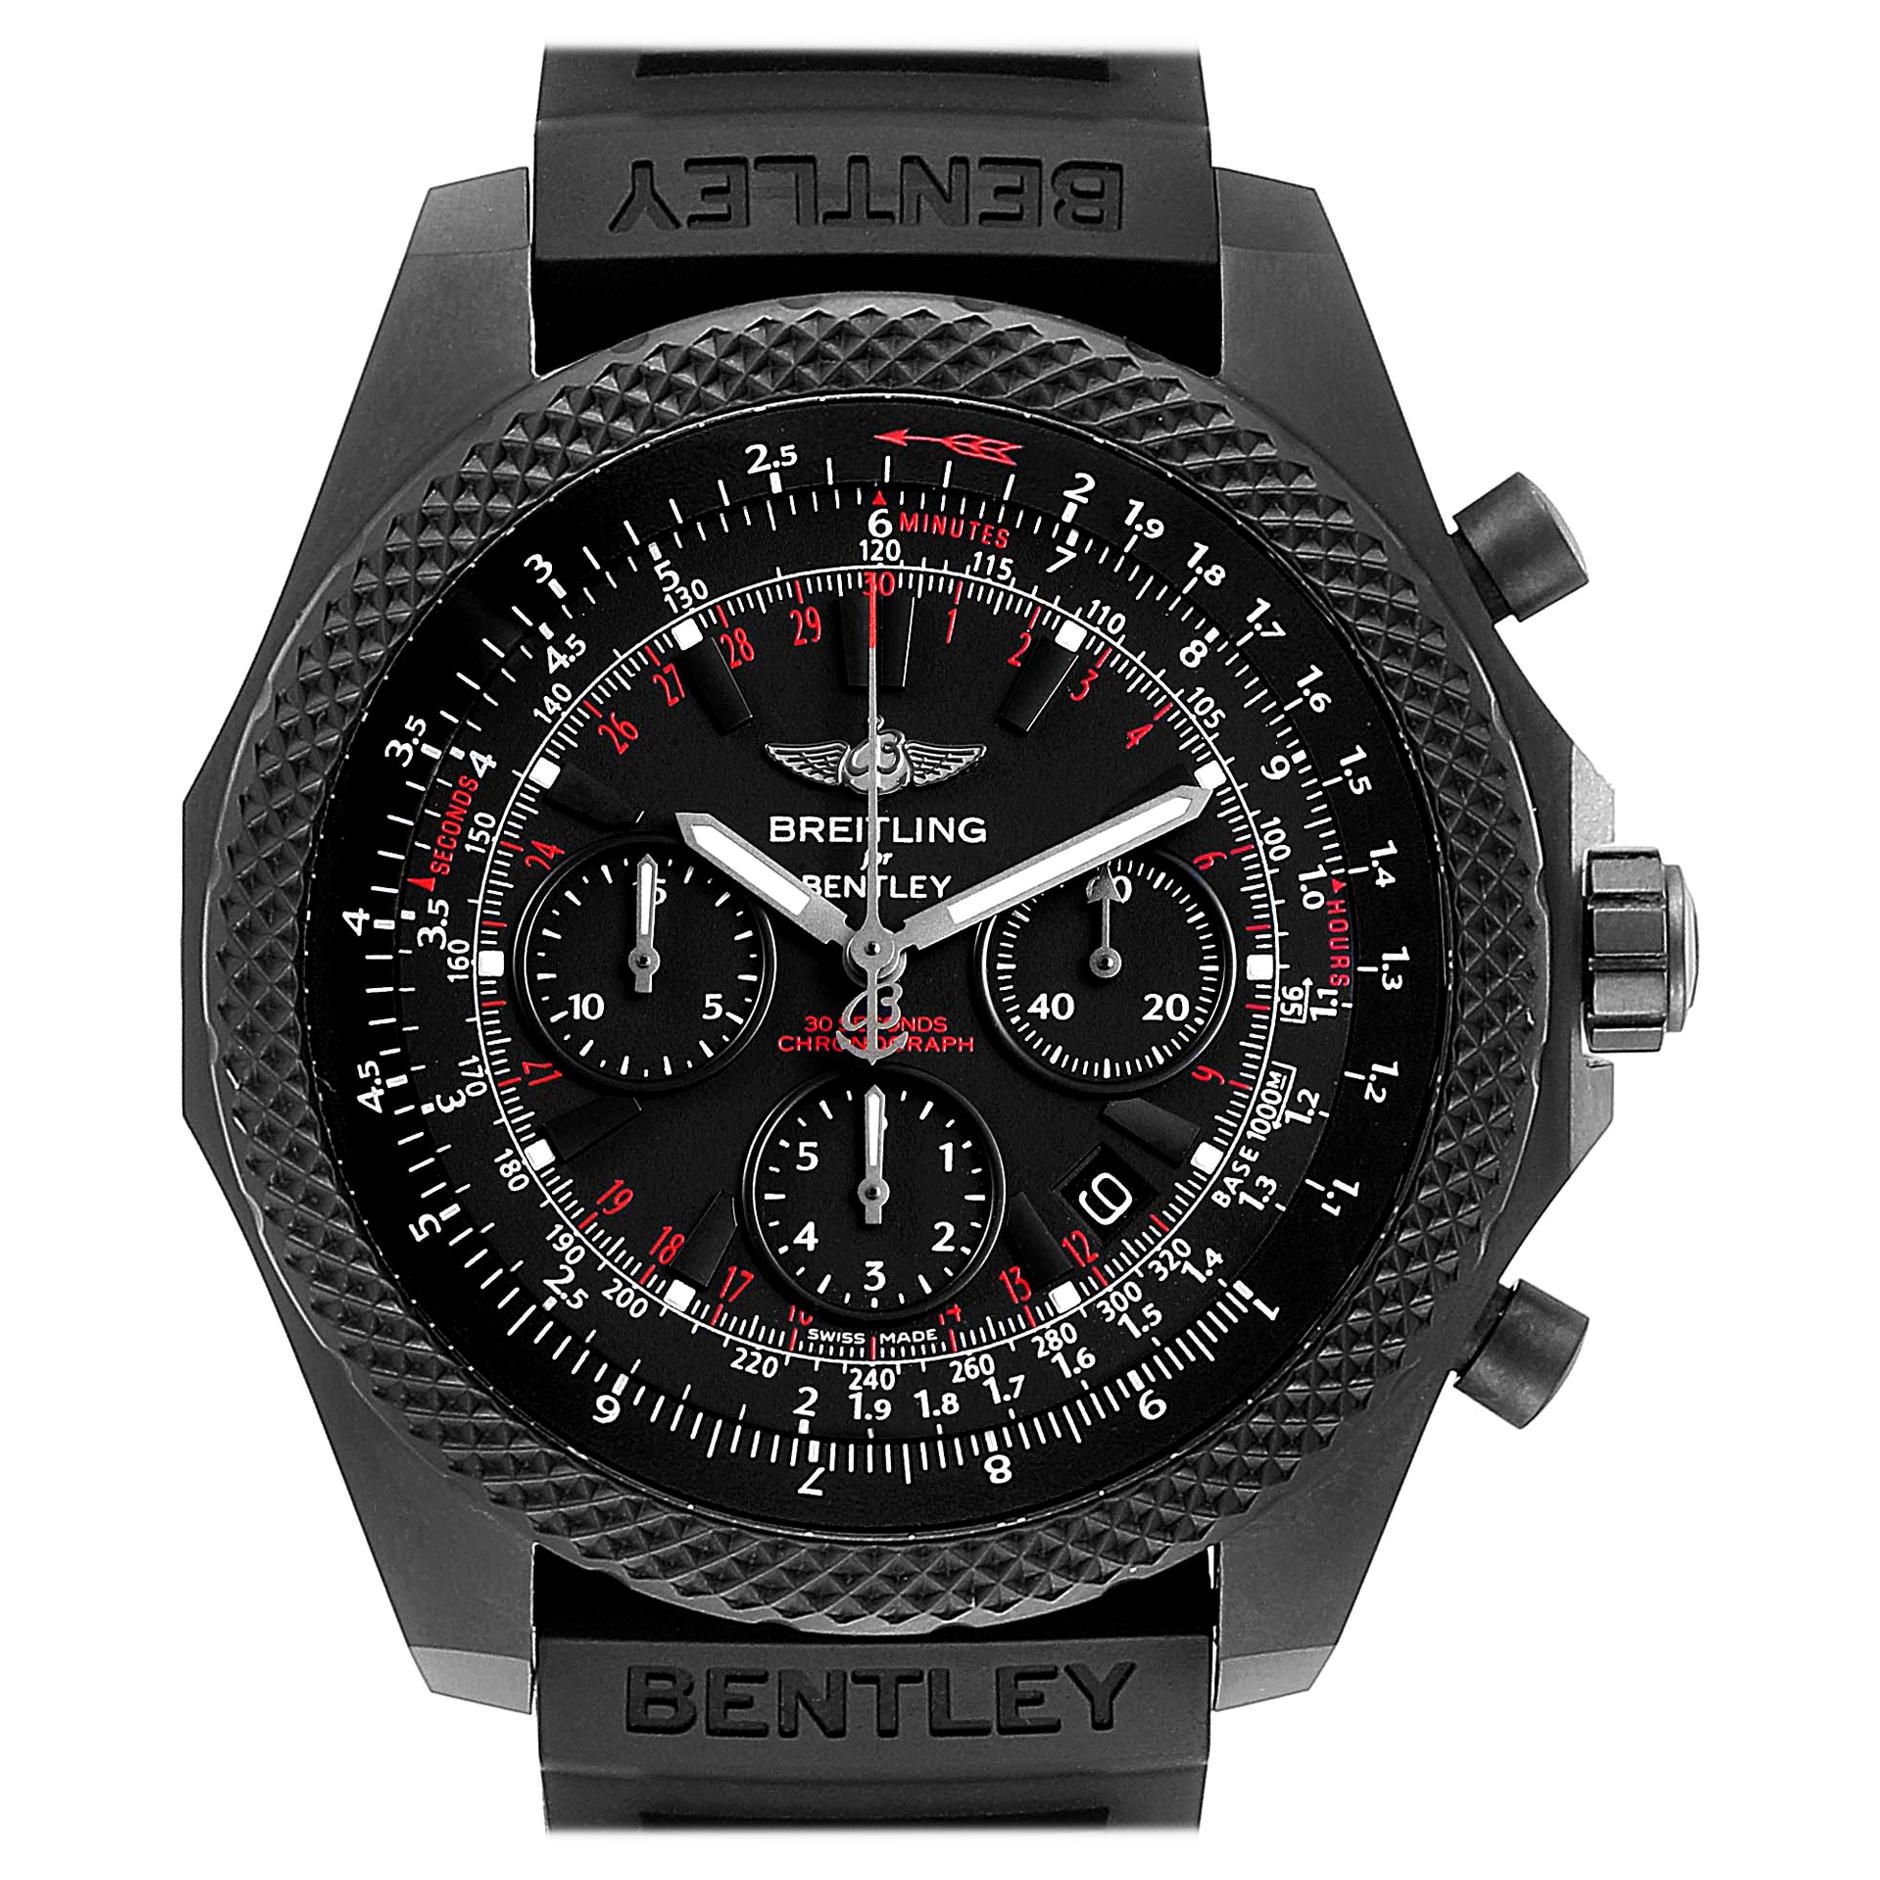 Breitling Bentley Light Body Midnight Carbon Rubber Strap LE Watch V25367 For Sale